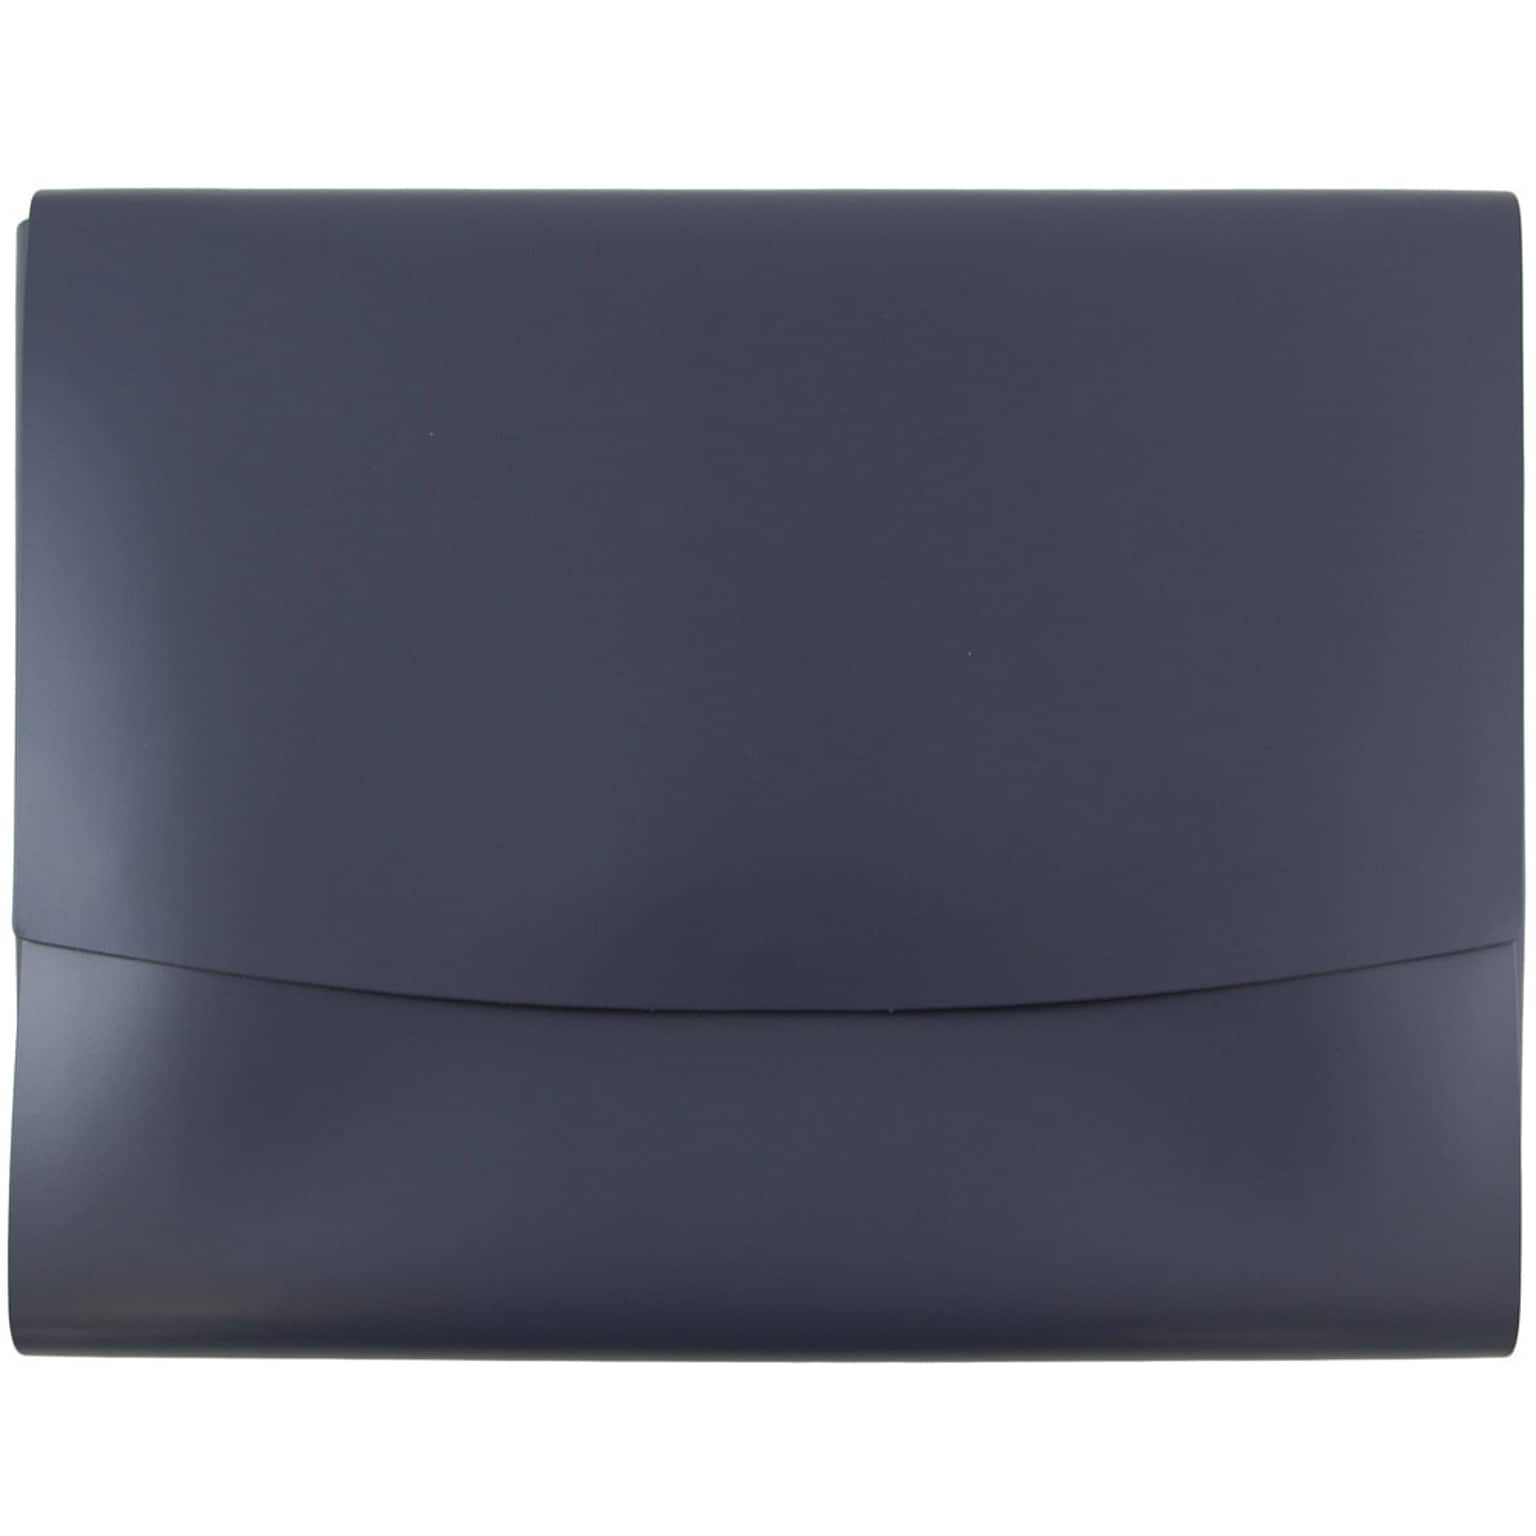 JAM Paper® Italian Leather Portfolios With Snap Closure, 10 1/2 x 13 x 3/4, Navy Blue, 12/Pack (2233320840B)